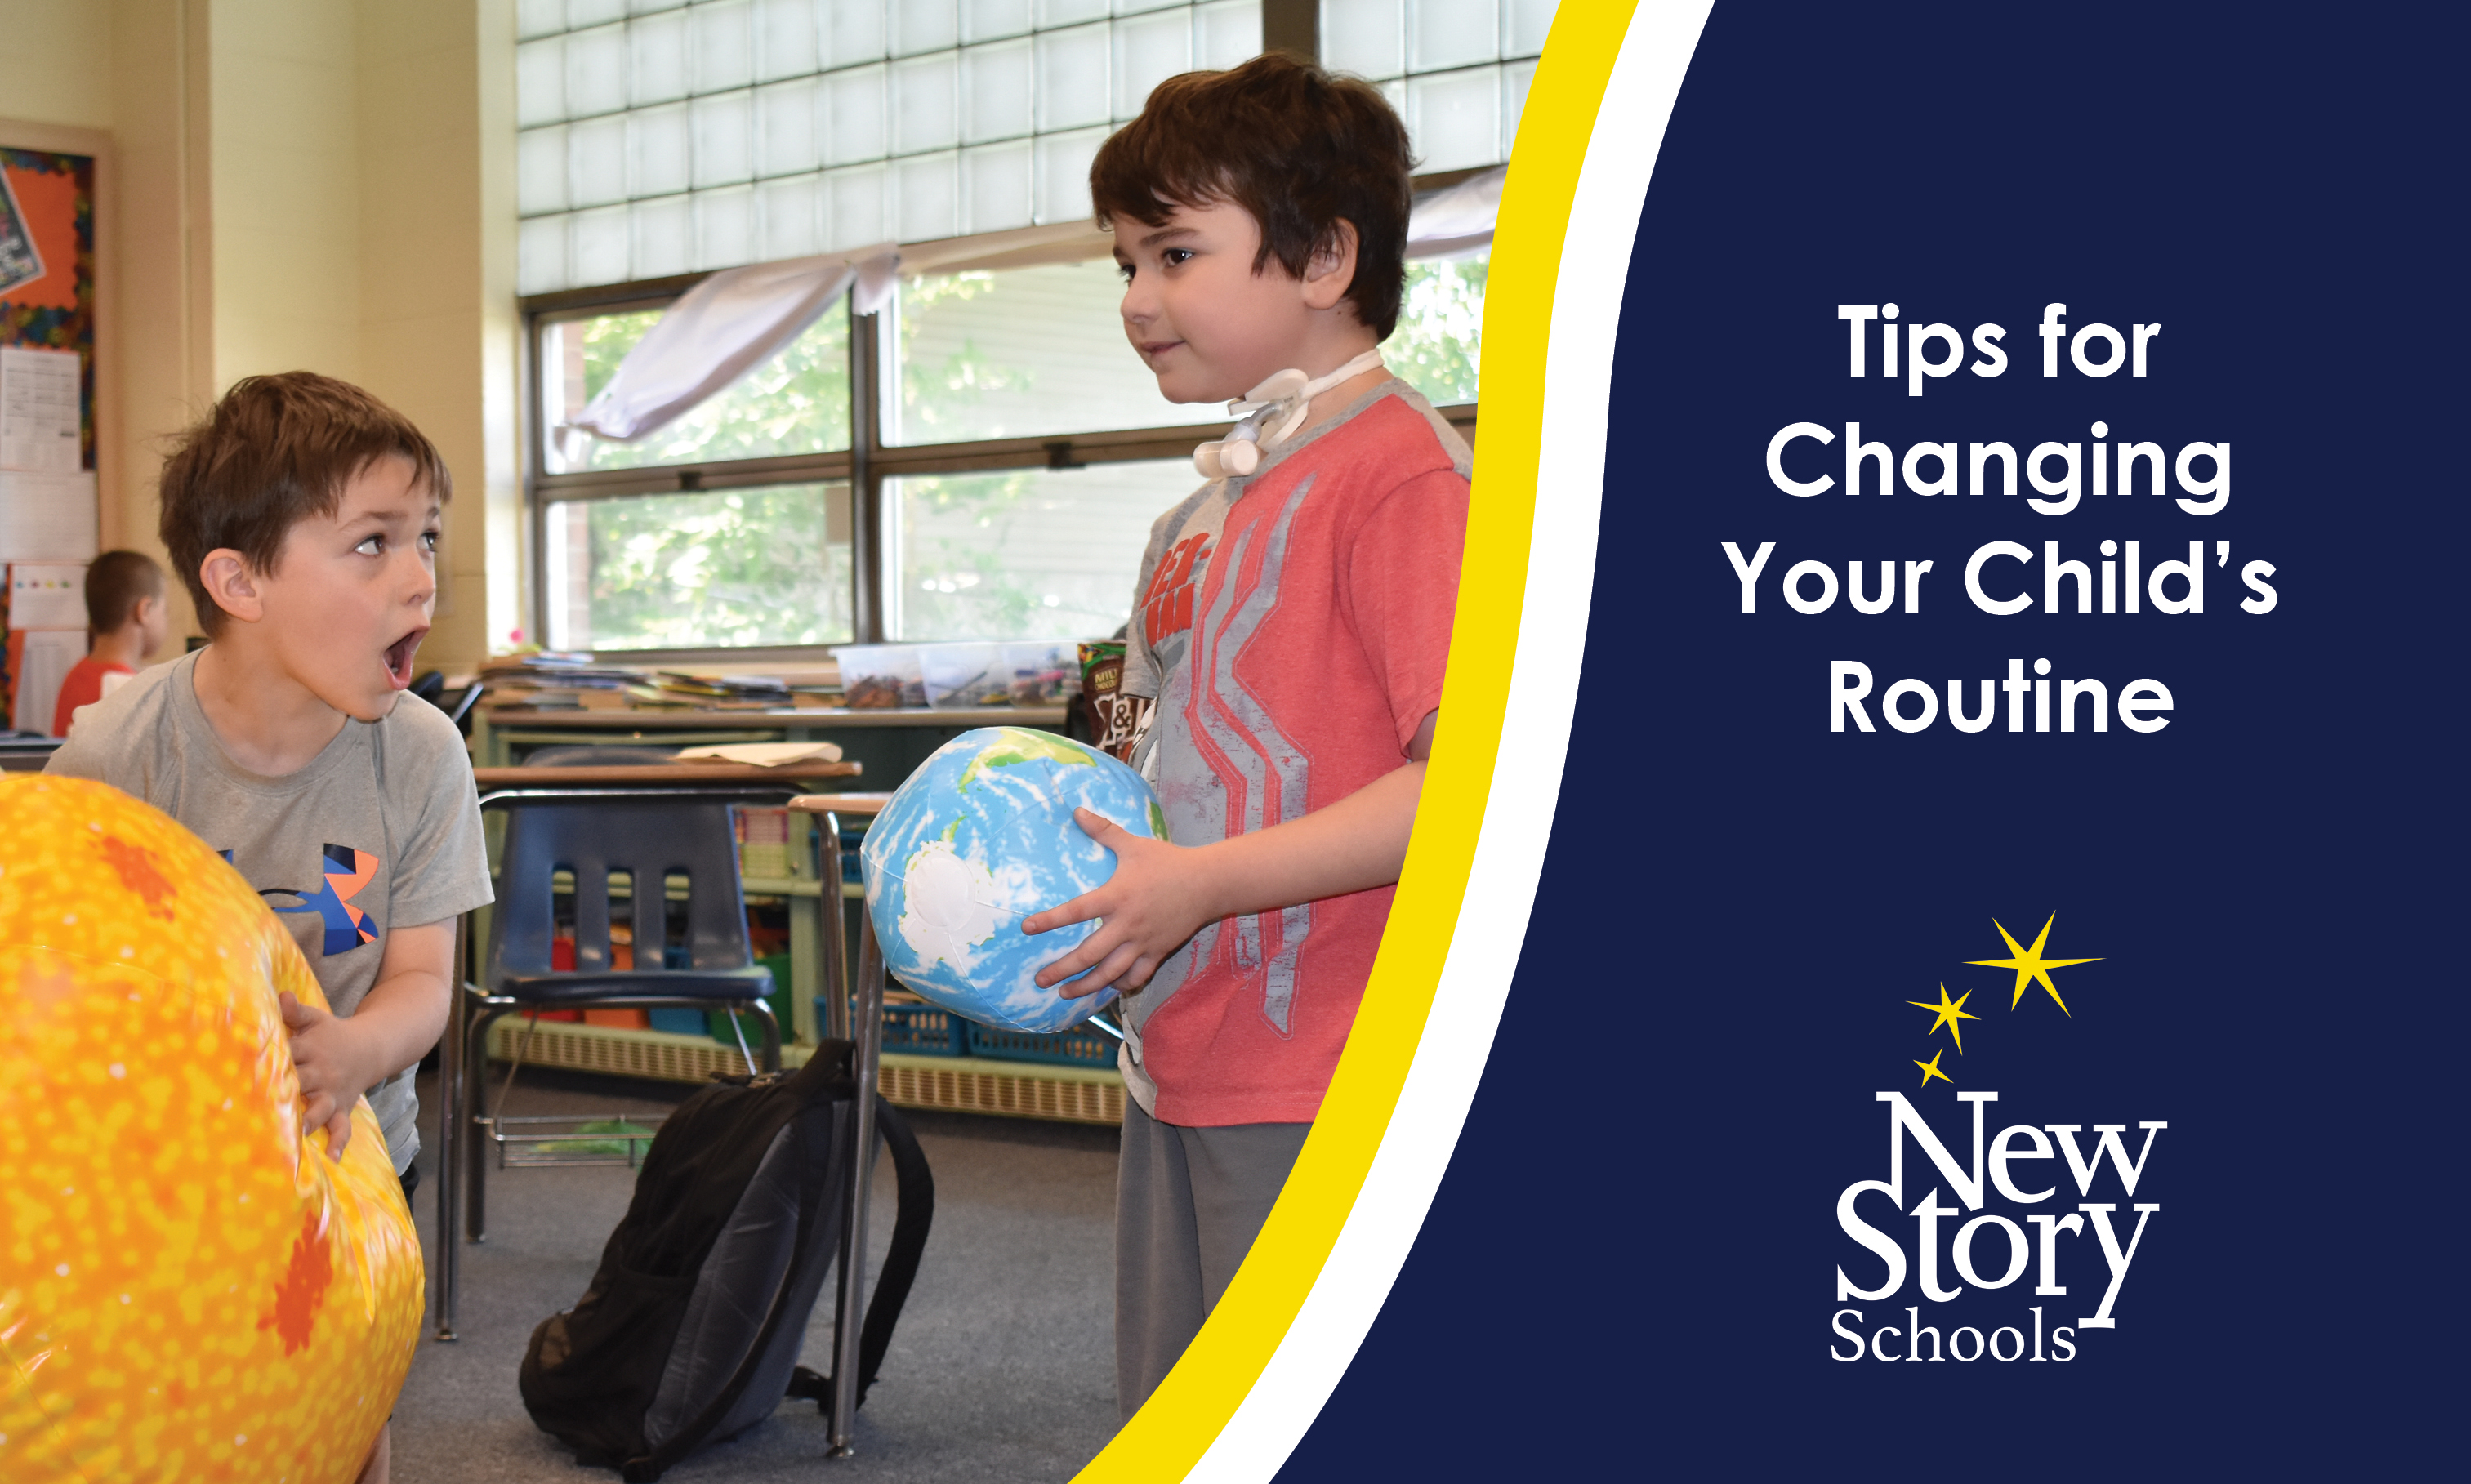 Two Students in their Special Education Classroom. Boy on the left is making an "That's awesome" face and clutching a giant orange inflatable, boy on the right looks placid and holds a smaller ball.  Title: Tips for Changing Your Child's Routine